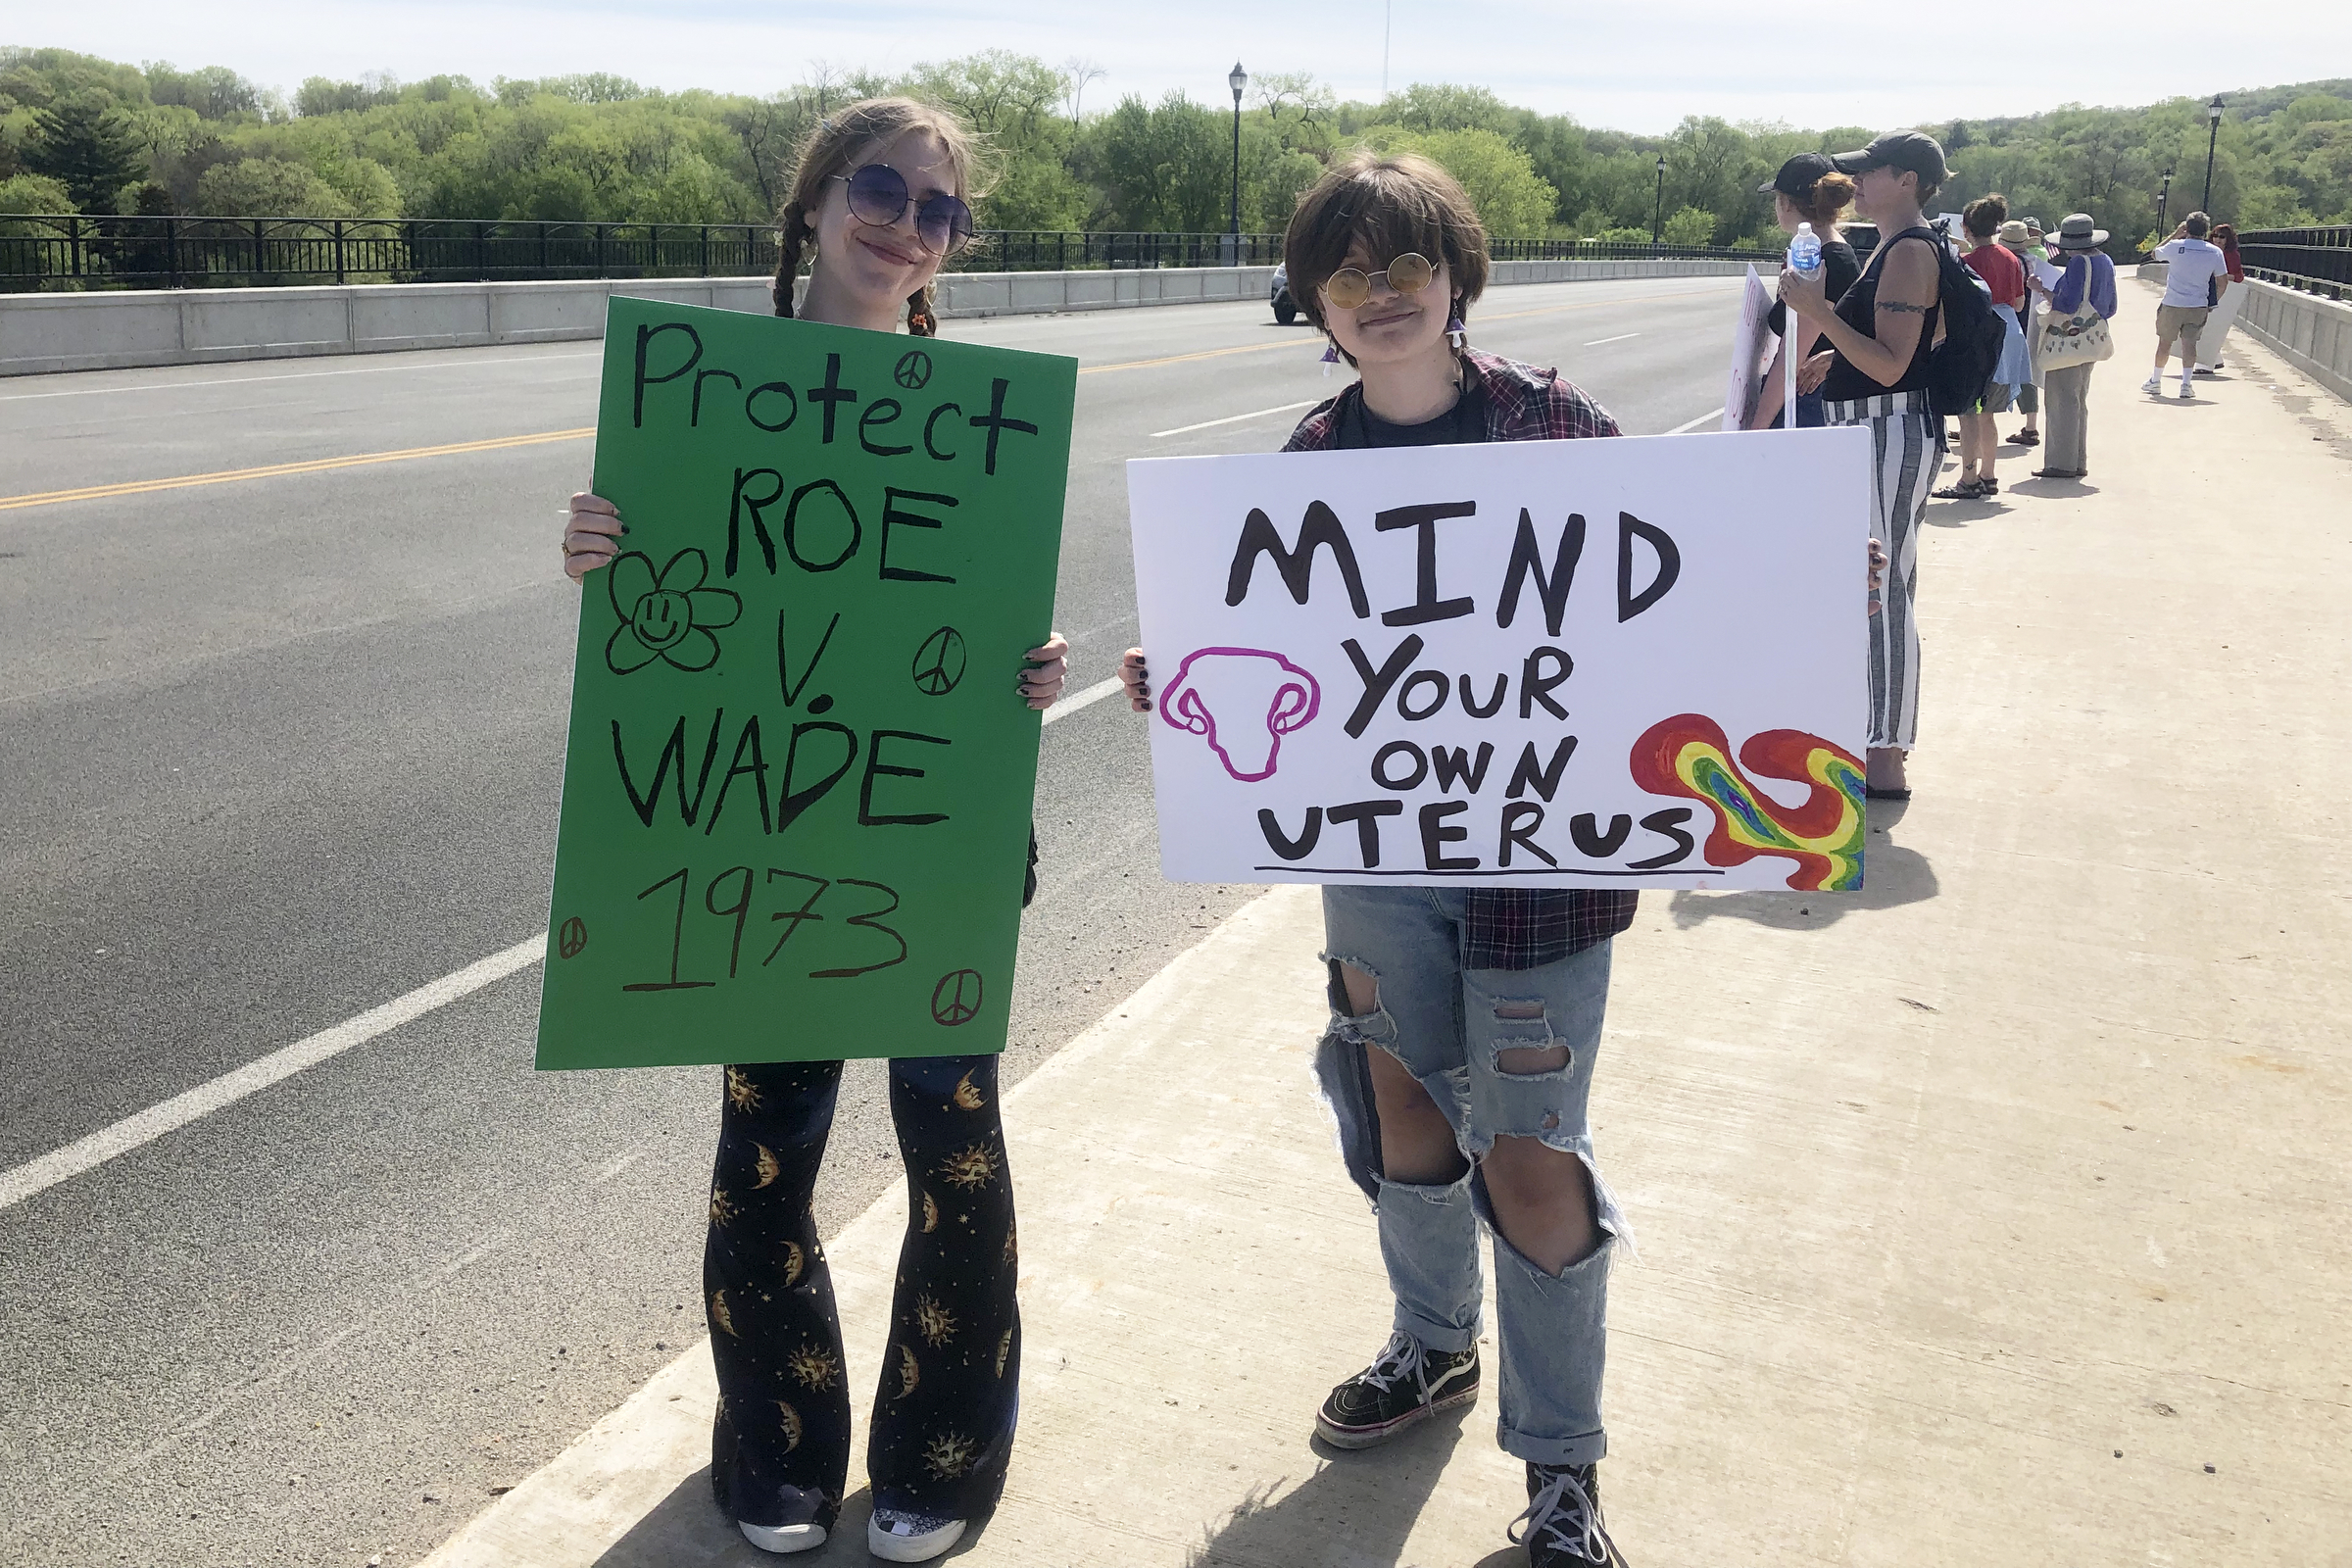 Cousins Presley Bonin, left, and Natalie Klecker, right, attend an abortion rights protest on the bridge over the Wisconsin River at Sauk City, Wis.